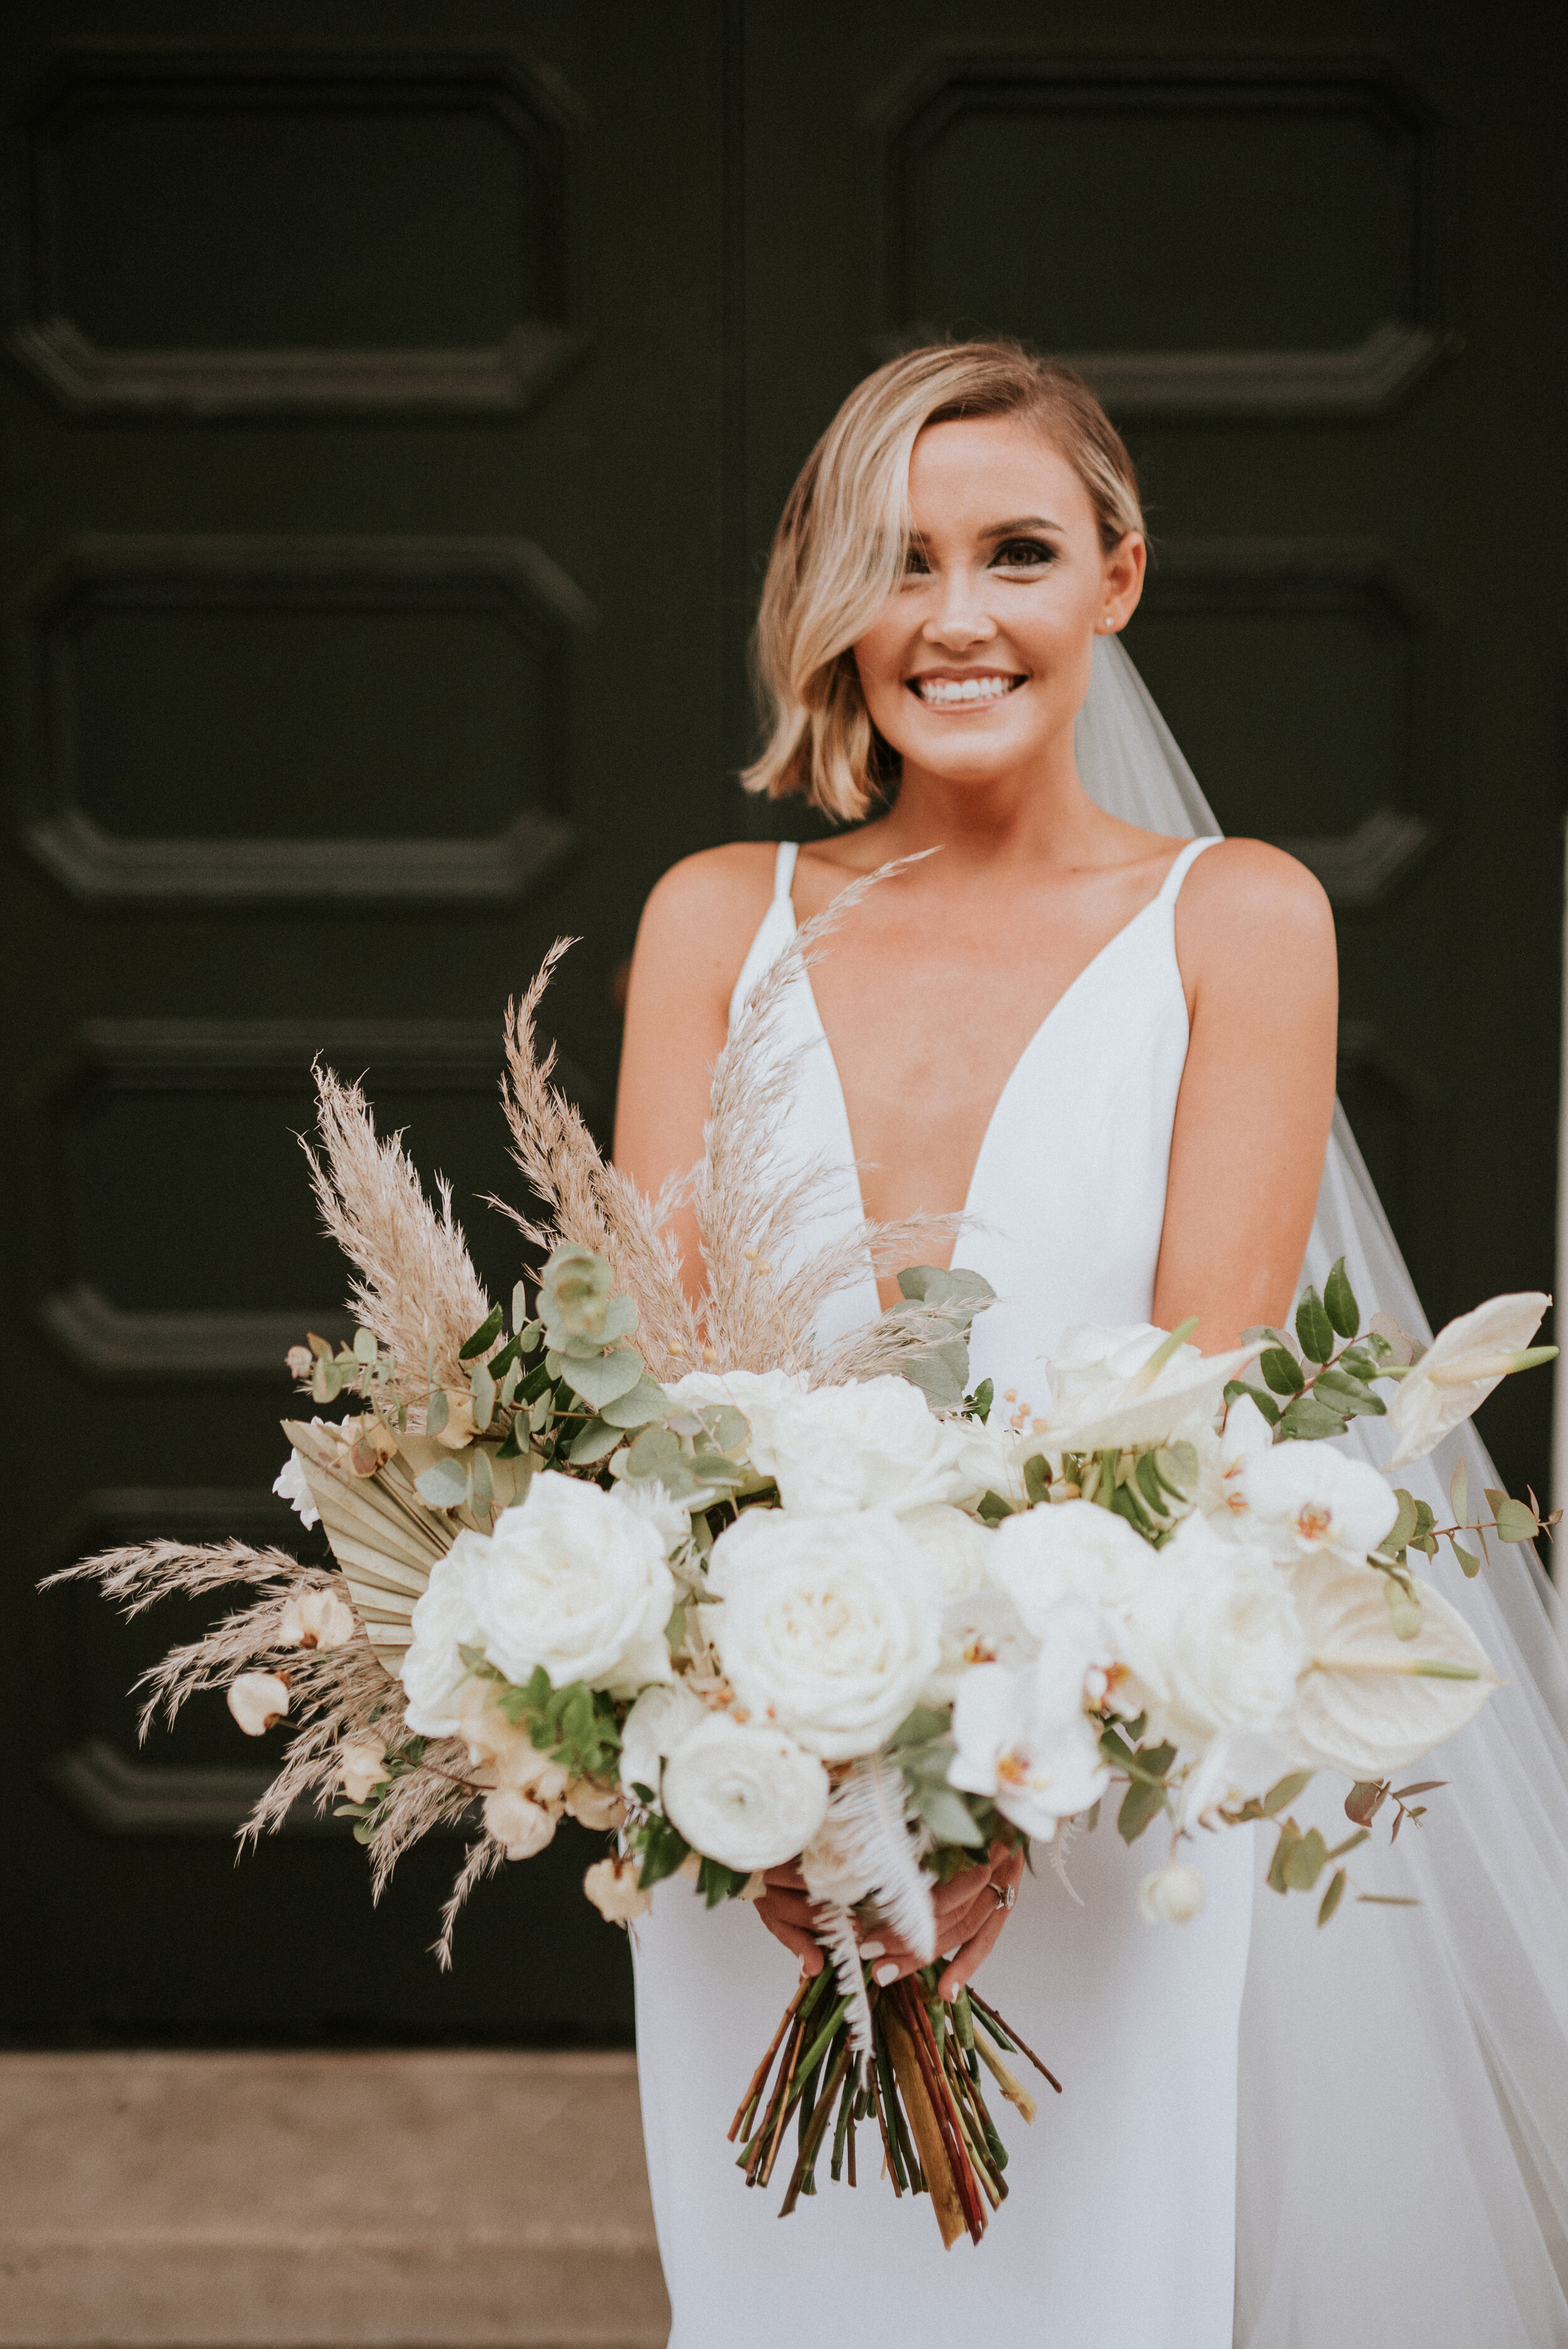 Bohemian and modern yet classically elegant. This Bridal bouquet perfectly married boho elements of pampas grass, eucalyptus, and dried florals with topical stems of anthurium, orchid and ranunculus for a fresh take on white. Designed by Nashville w…